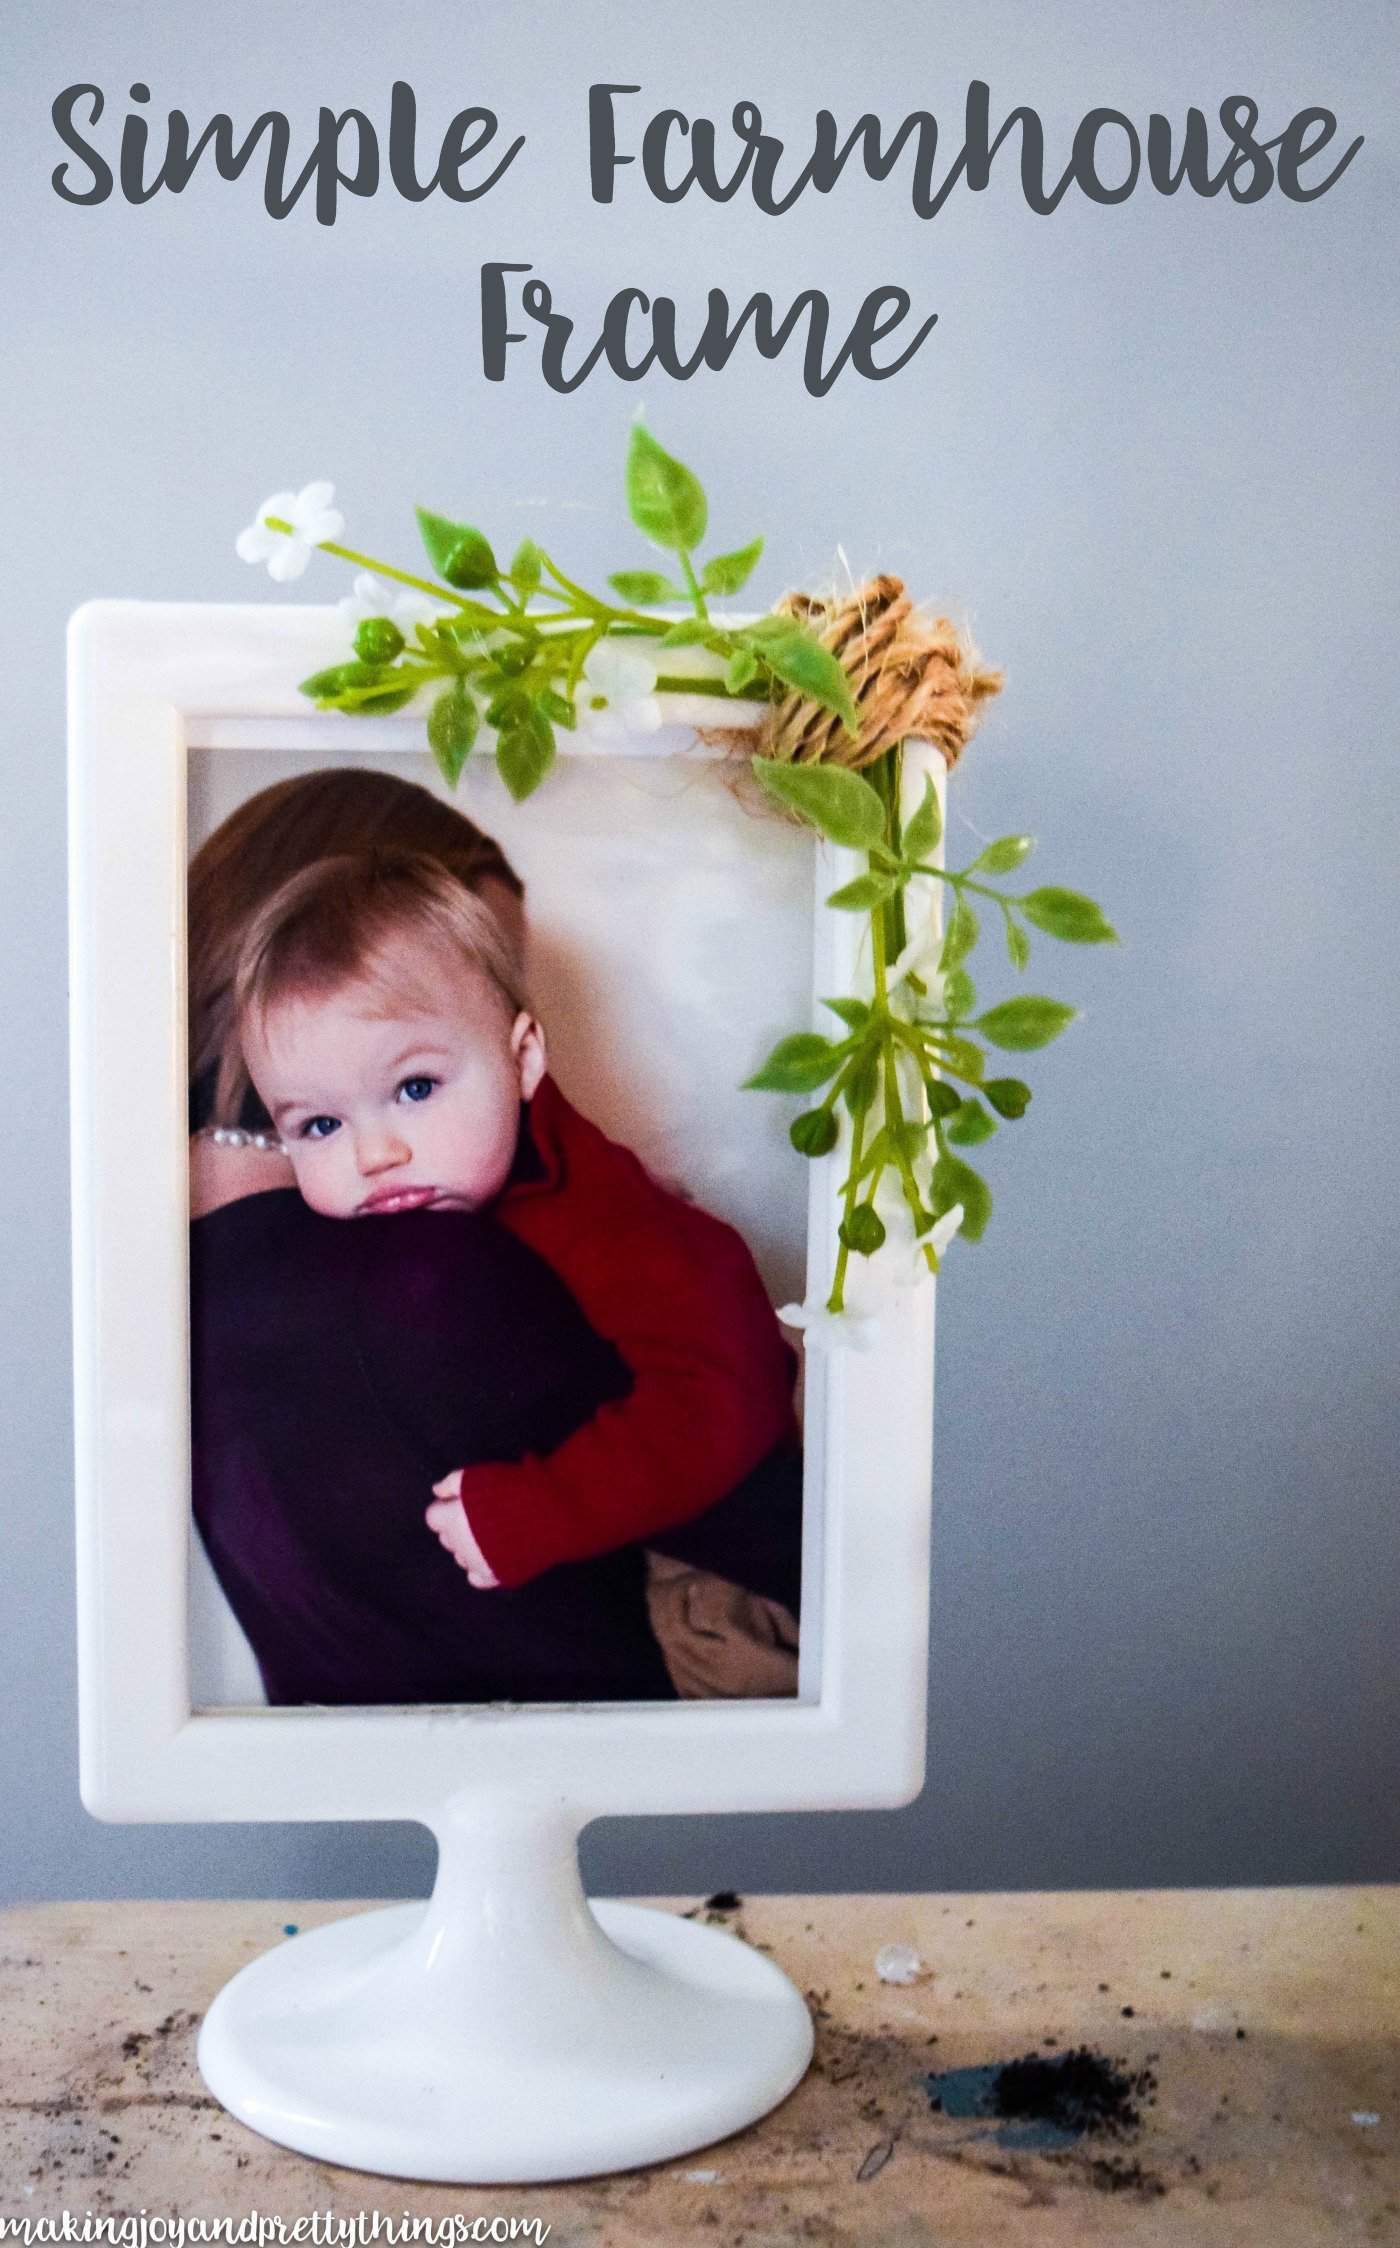 A white picture frame with a round base sits on a wood surface in front of a light blue wall. Inside the frame is a picture of a mother holding a toddler with big blue eyes, looking over the mother's shoulder. Sprigs of faux greenery and small white baby's breath flours and a string of twine are glued to the frame. Black text overlay on the image says 